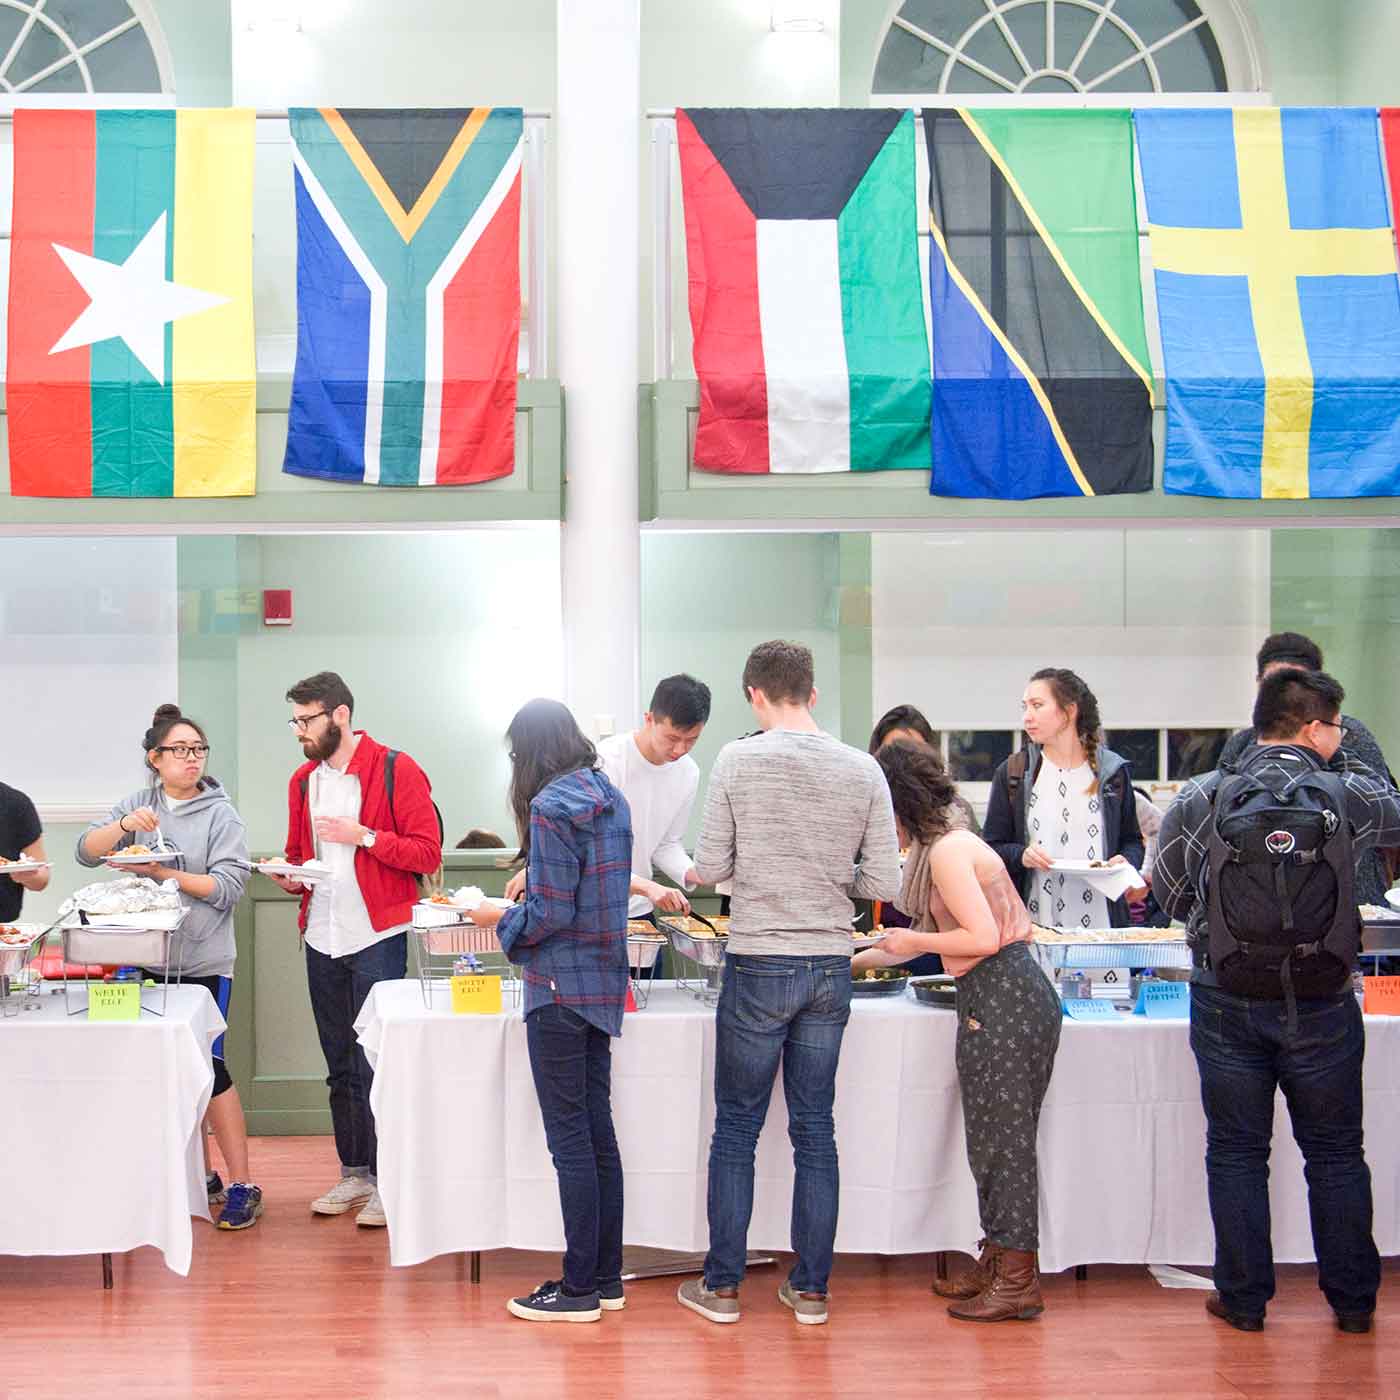 People stand in a line while food is served in a large room with flags of different countries